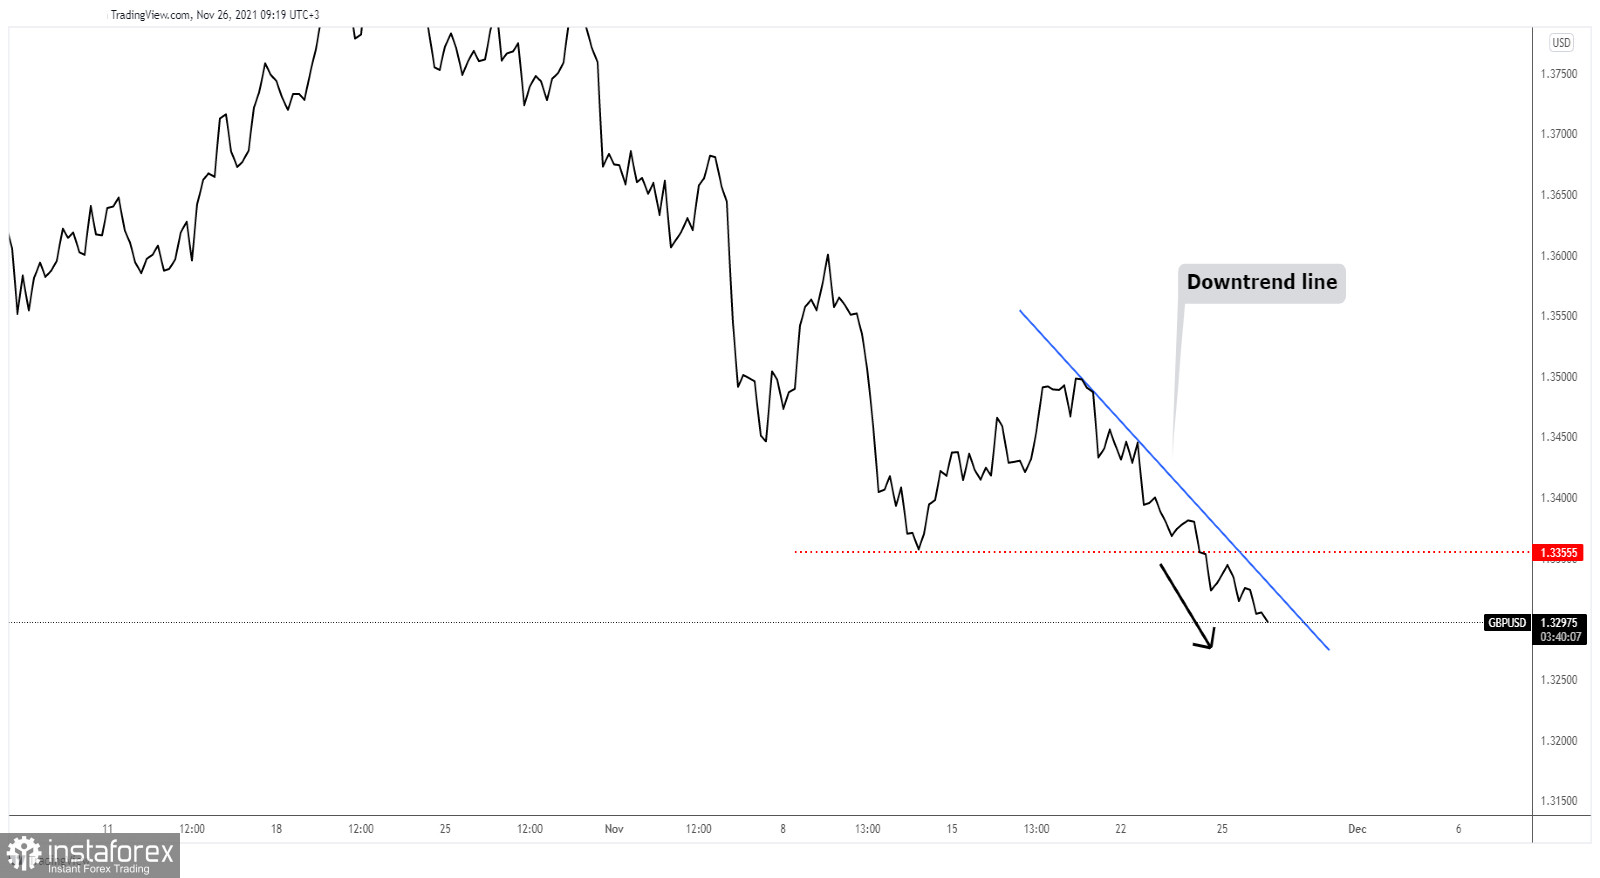 GBP/USD extends its downtrend